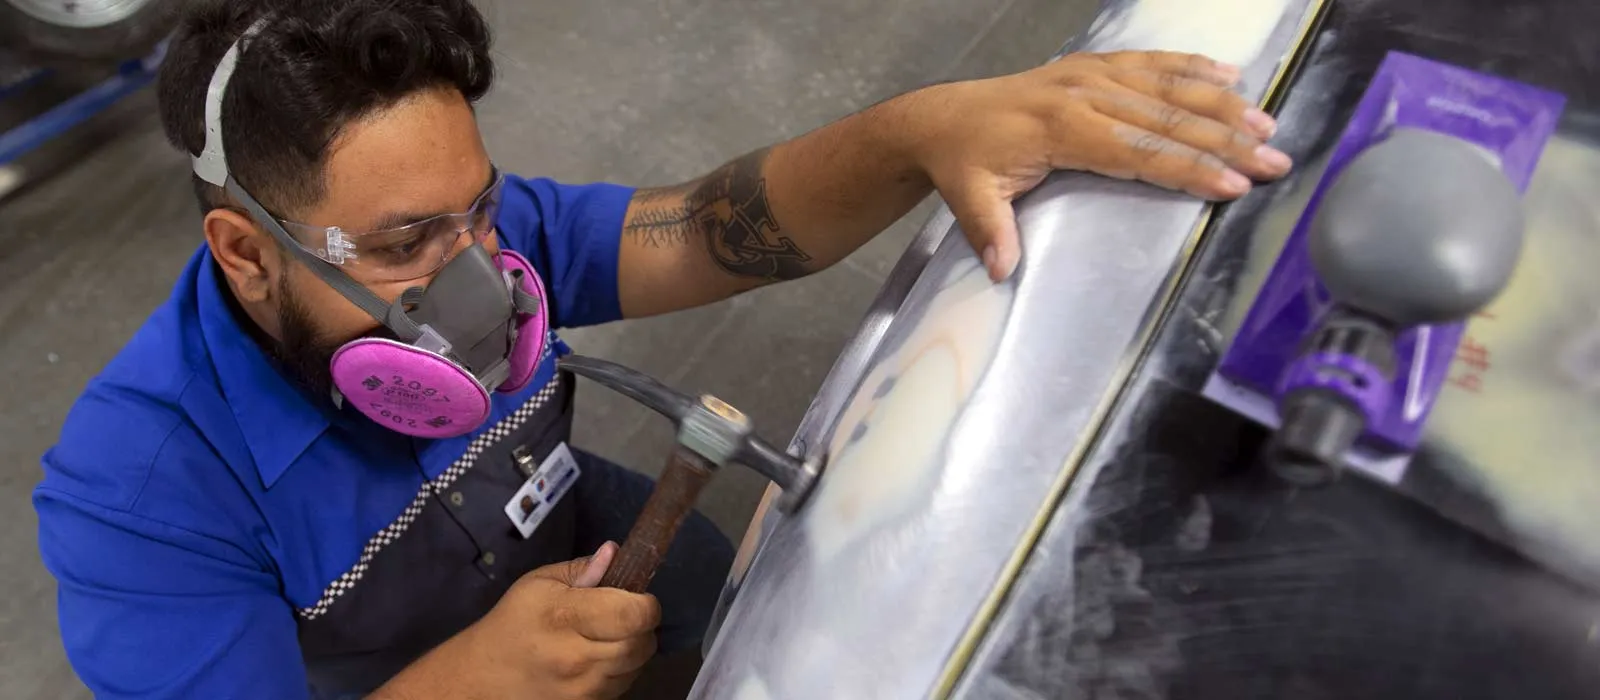 Auto Body Technician Salary: Highest-Paying Median Annual Collision Repair Salaries Ranked by State